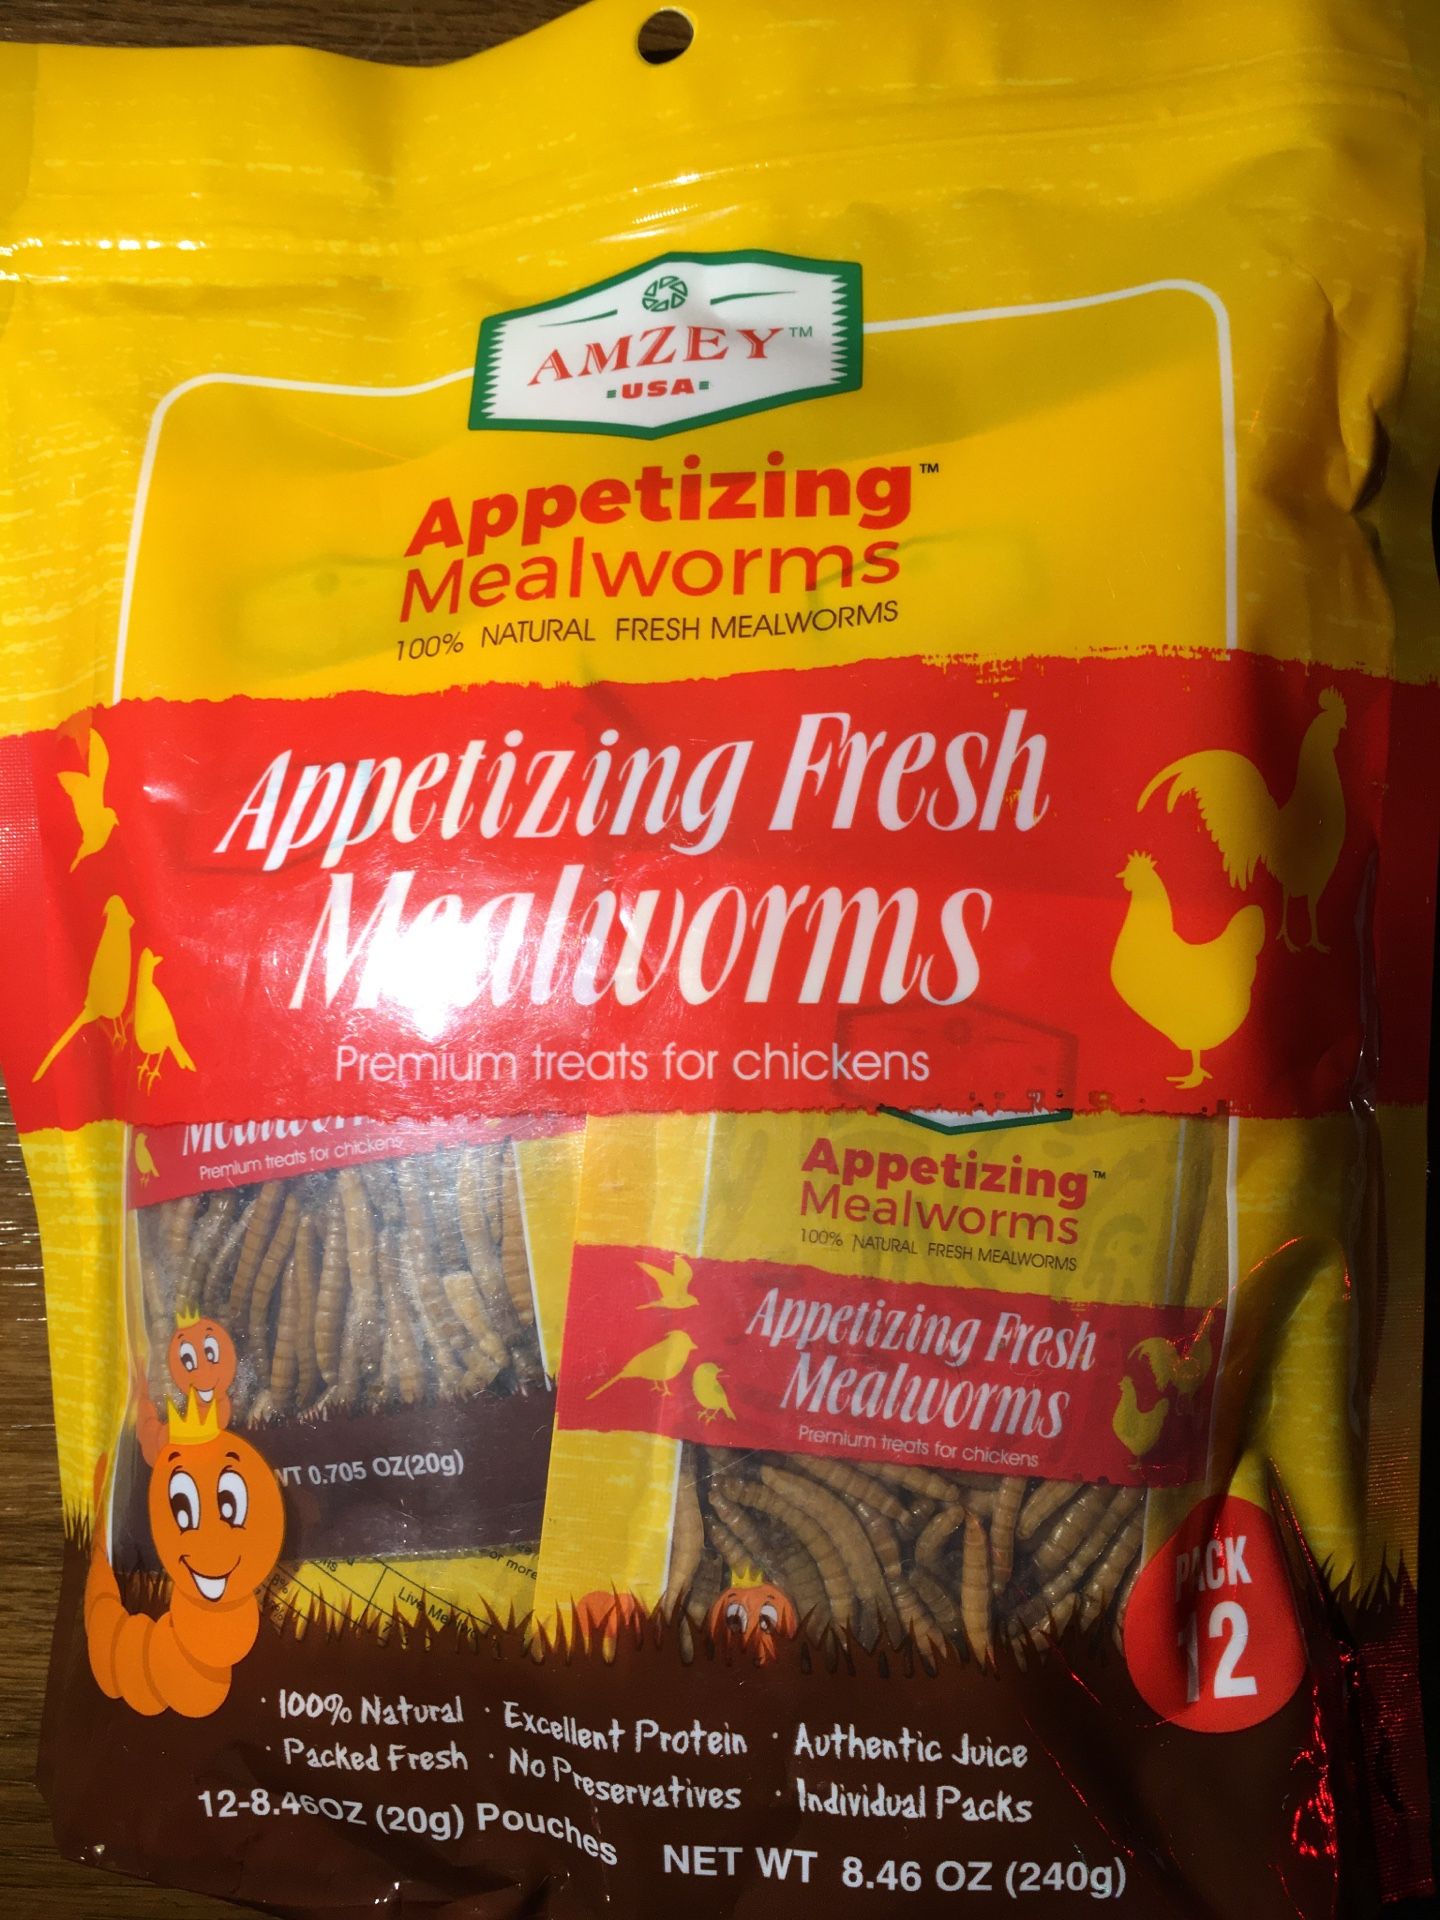 Free Mealworms For Pets, Non Human Consumption